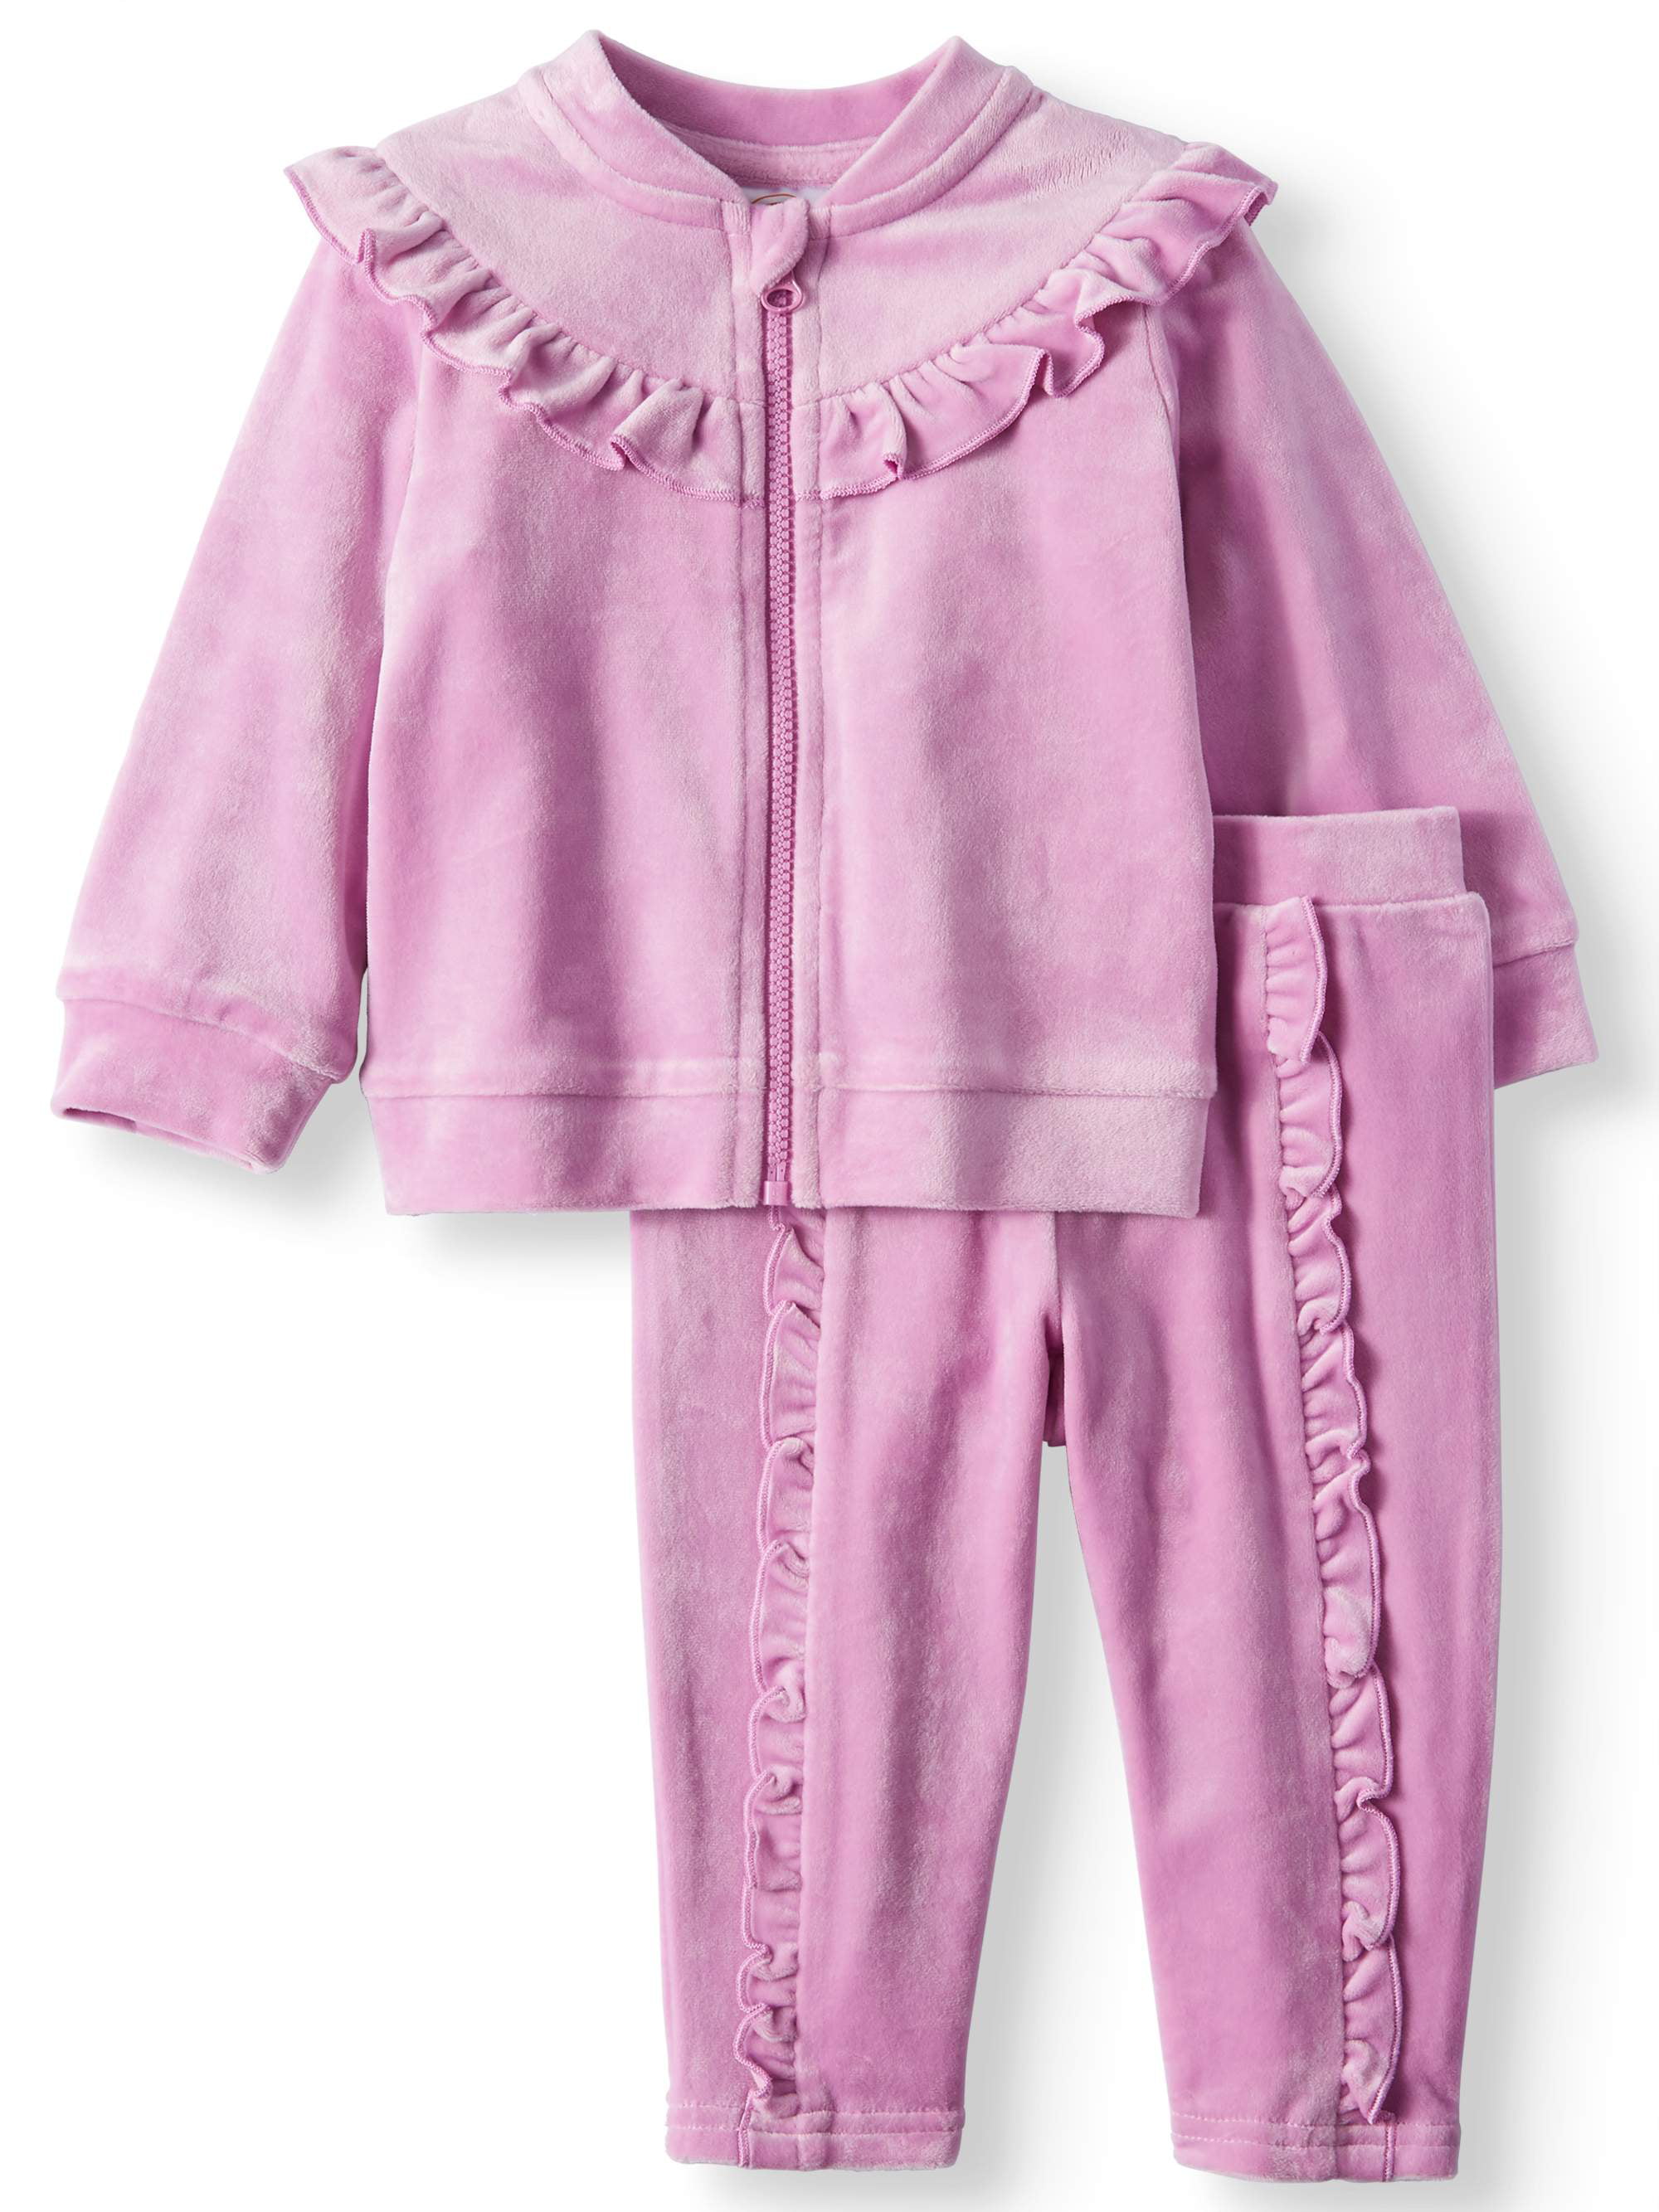 Ruffle Velour Top & Jogger Pants Tracksuit, 2-Piece Outfit Set (Baby ...